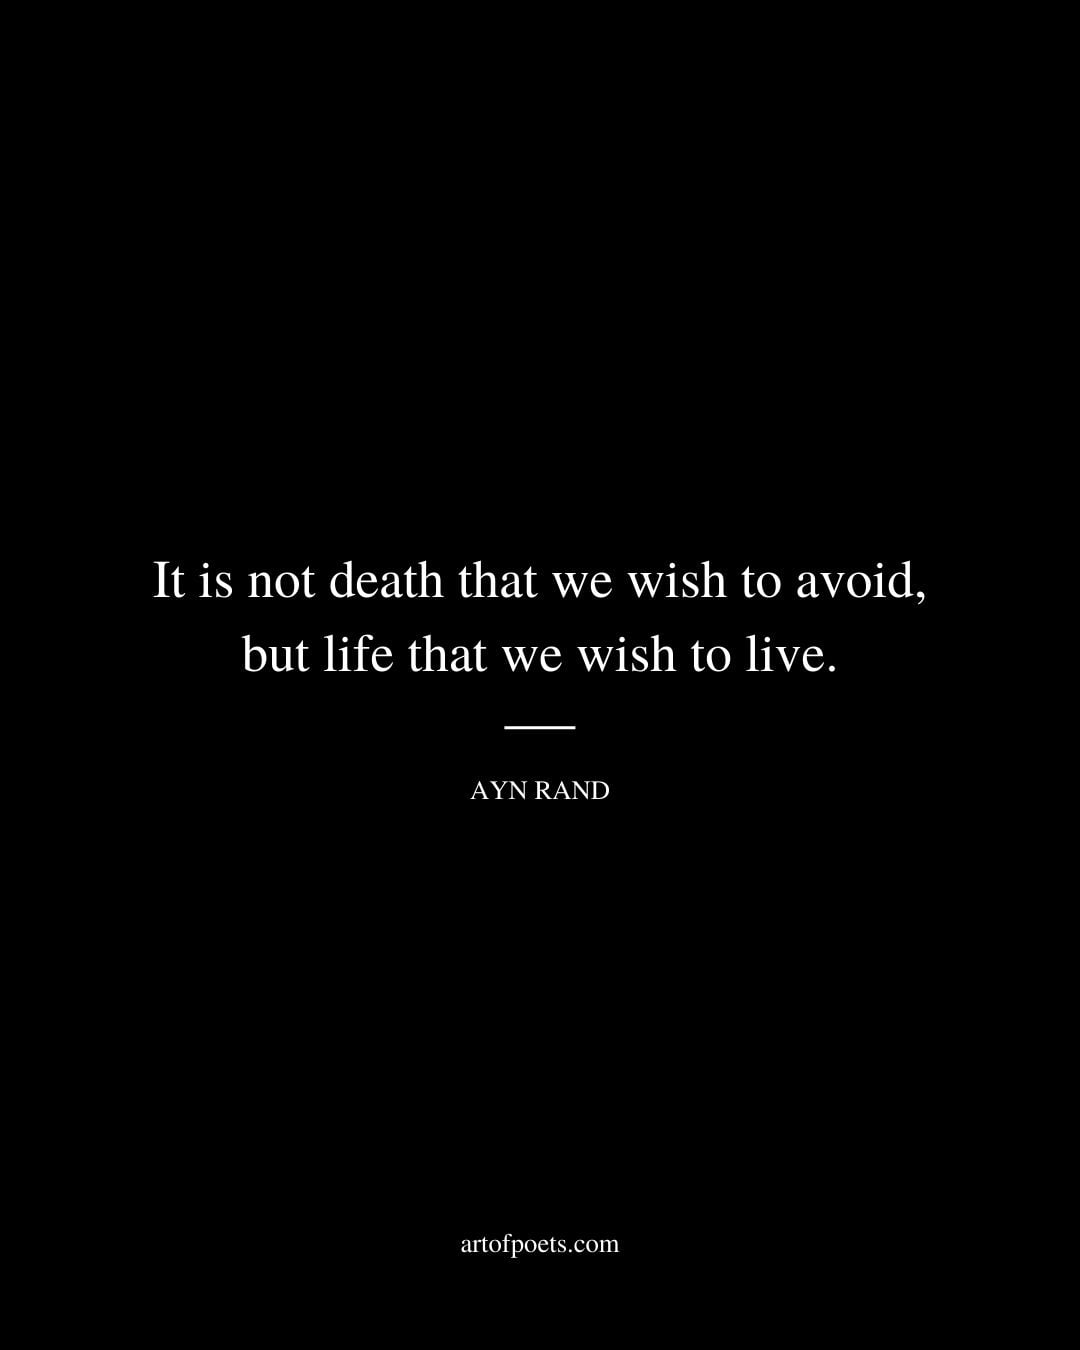 It is not death that we wish to avoid but life that we wish to live